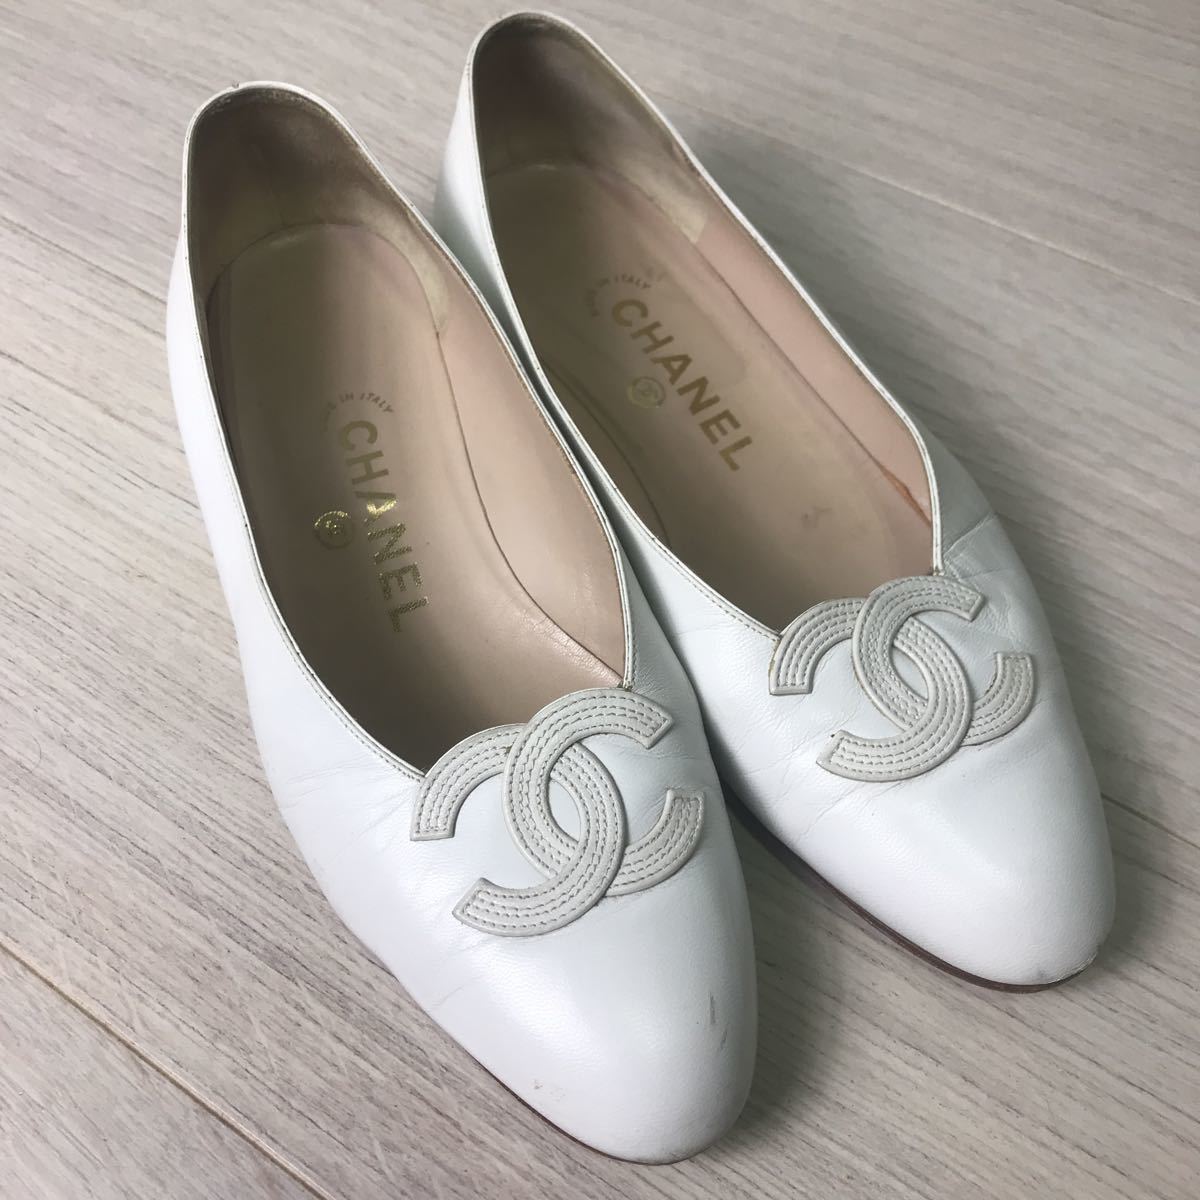 vintage CHANEL Vintage Chanel all white leather flat shoes shoes 37 23.5cm:  Real Yahoo auction salling